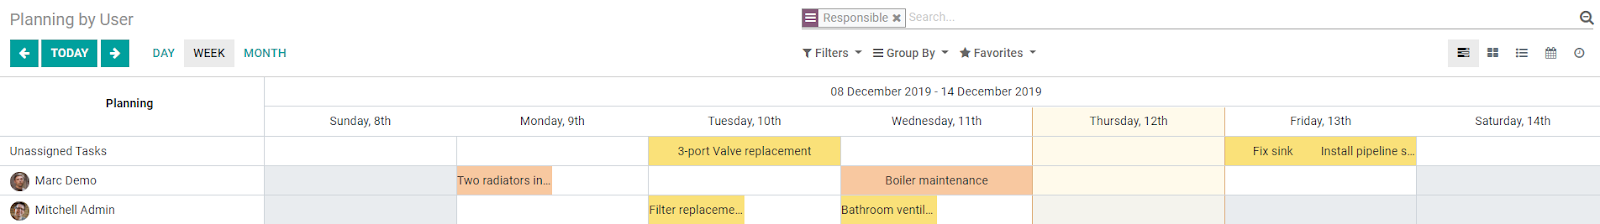 Manage your Employees’ Schedules and Time Off — Odoo 13.0 documentation